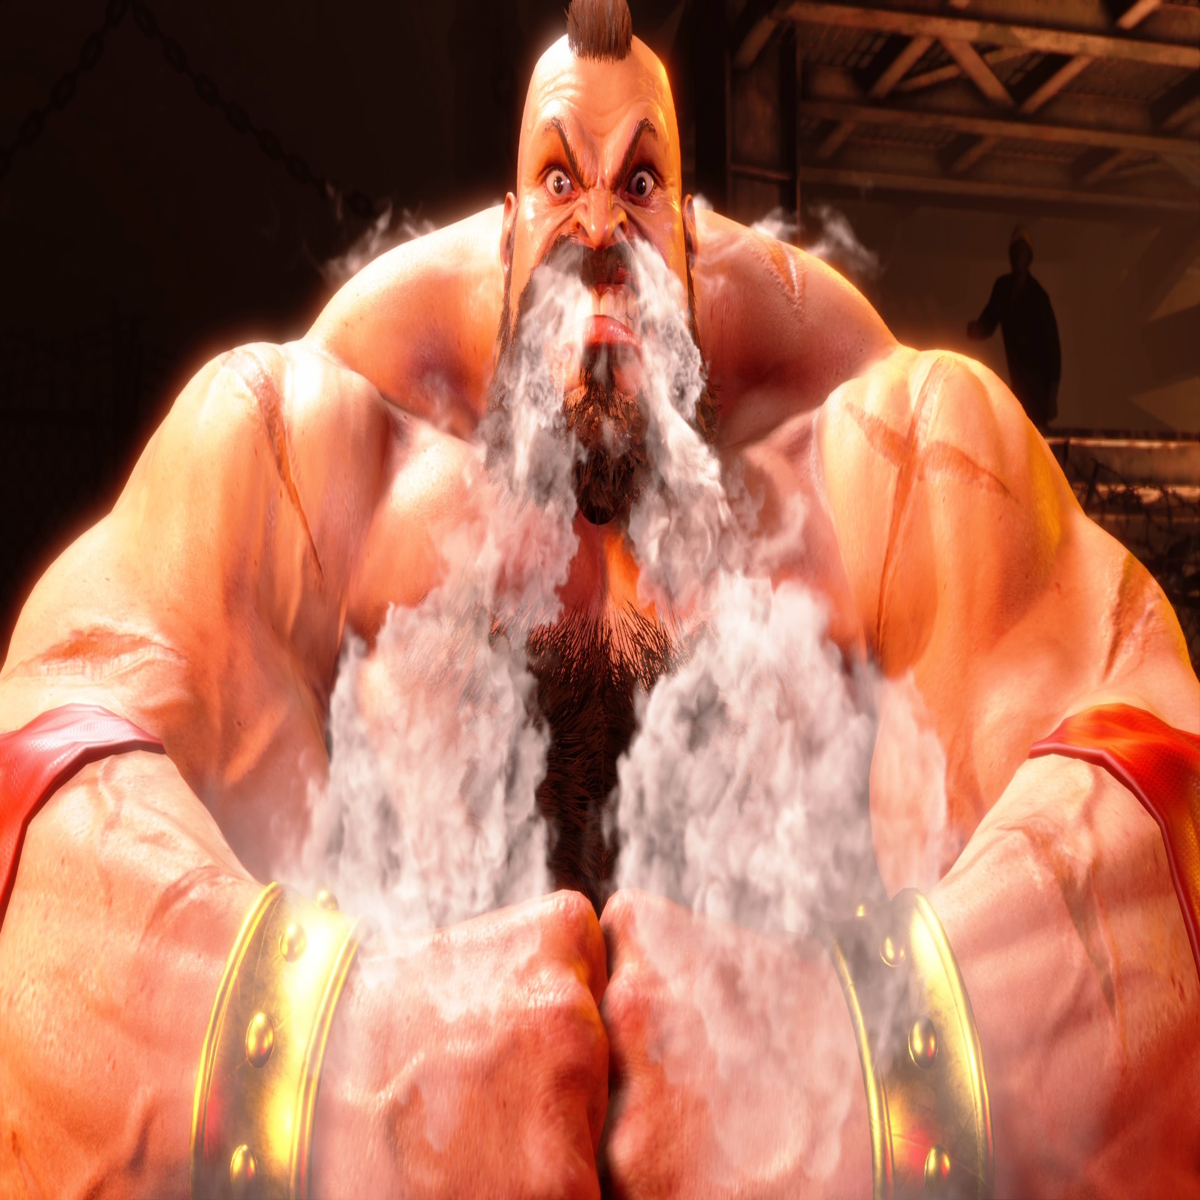 Zangief piledrives into Street Fighter 6 with a bod that puts the Gears  lads to shame